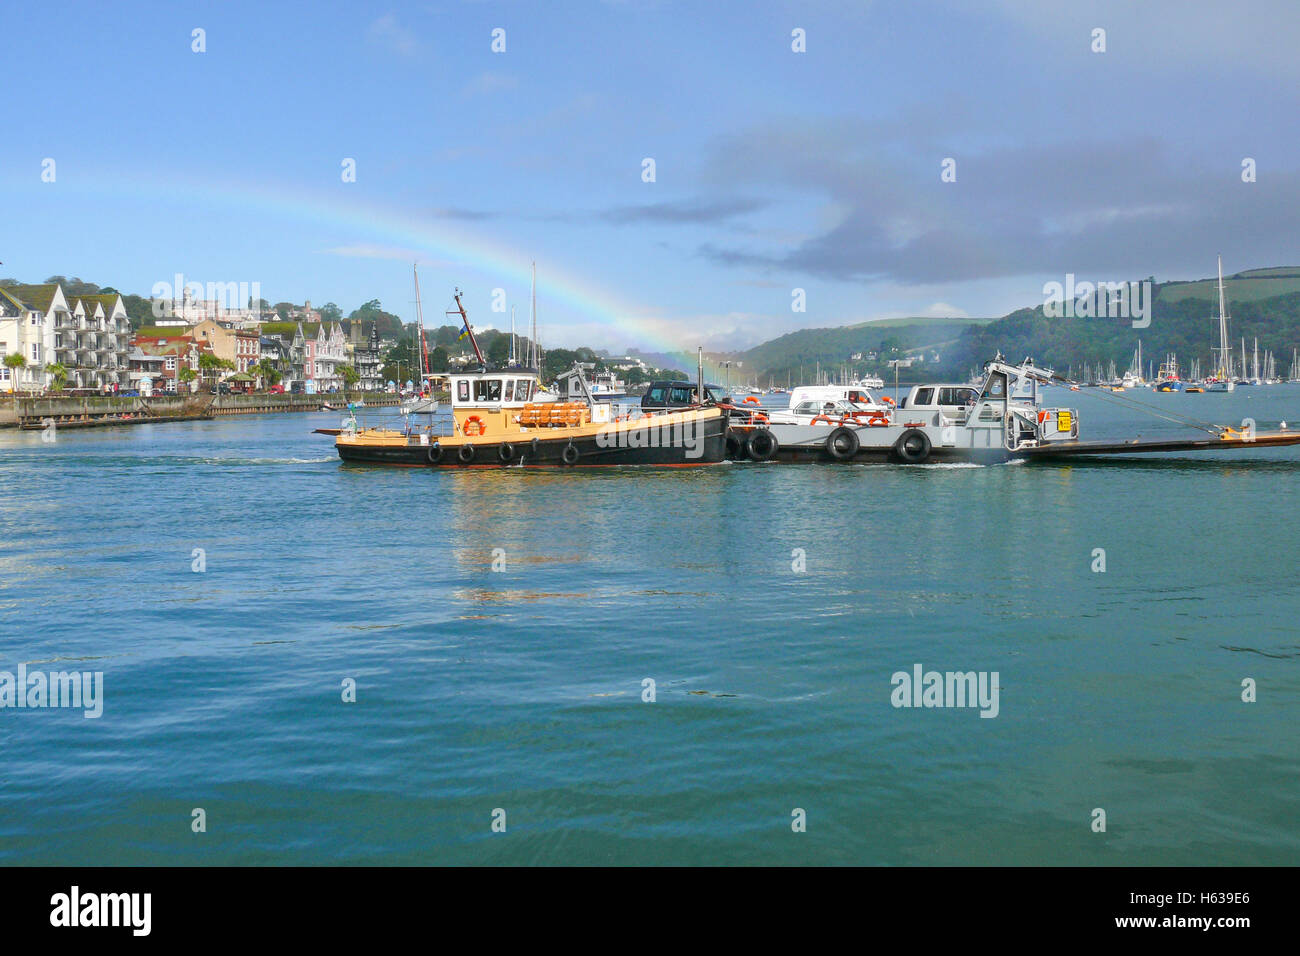 The Dartmouth Lower Ferry for cars and foot passengers plies between the town and Kingswear seen in mid river with rainbow. Stock Photo